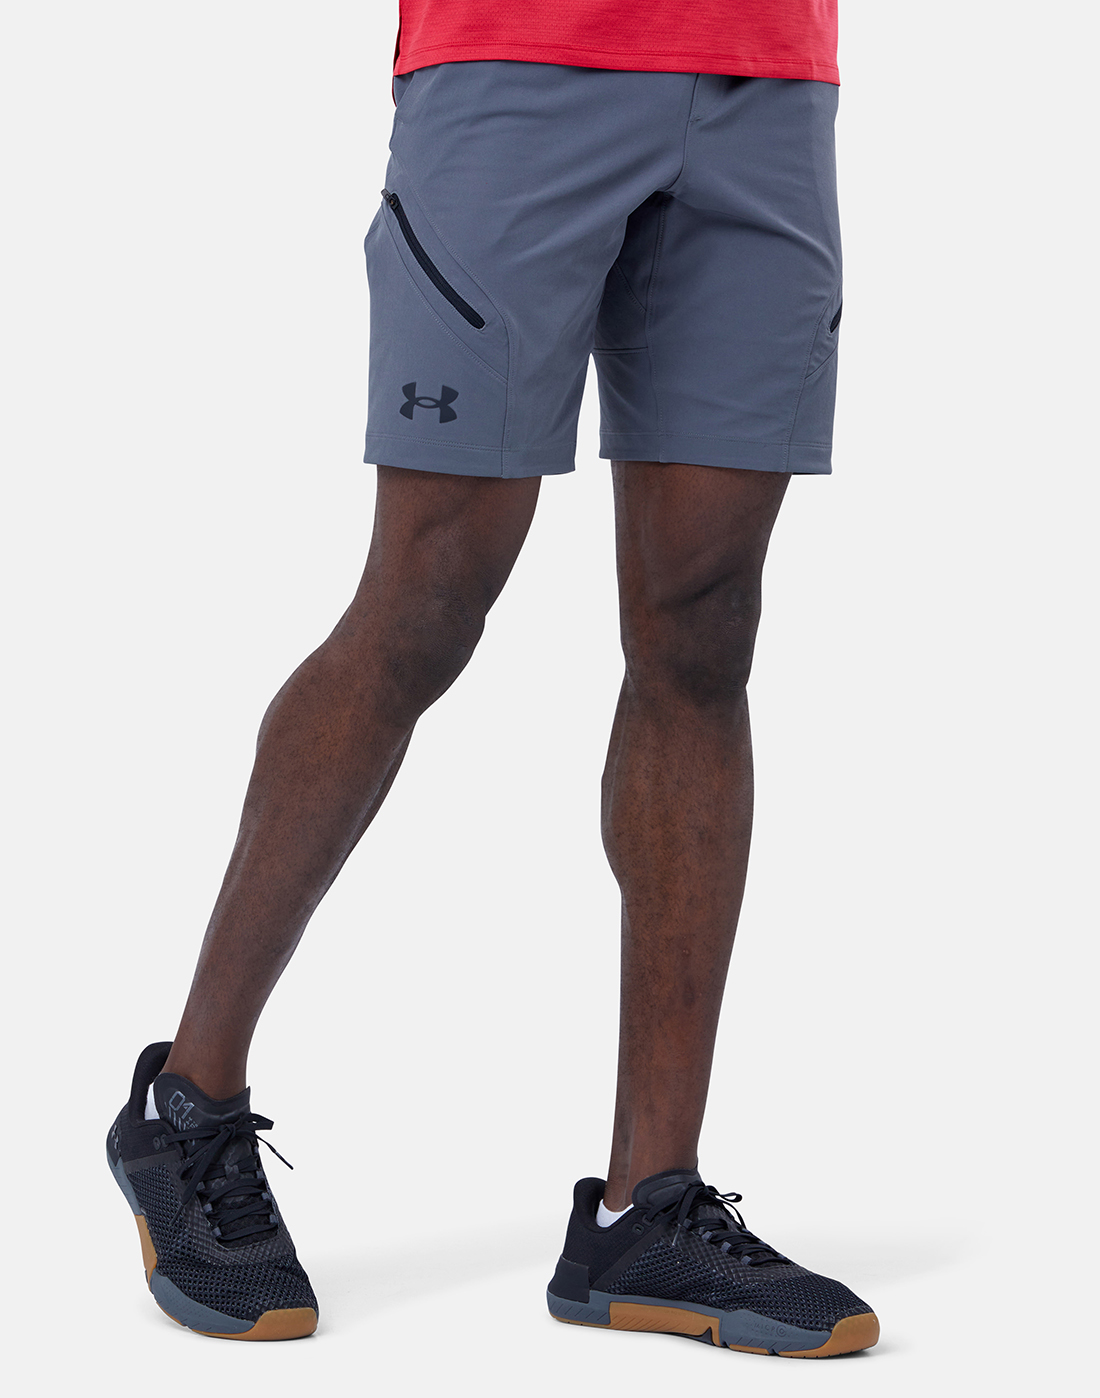 Under Armour Unstoppable training cargo shorts in black